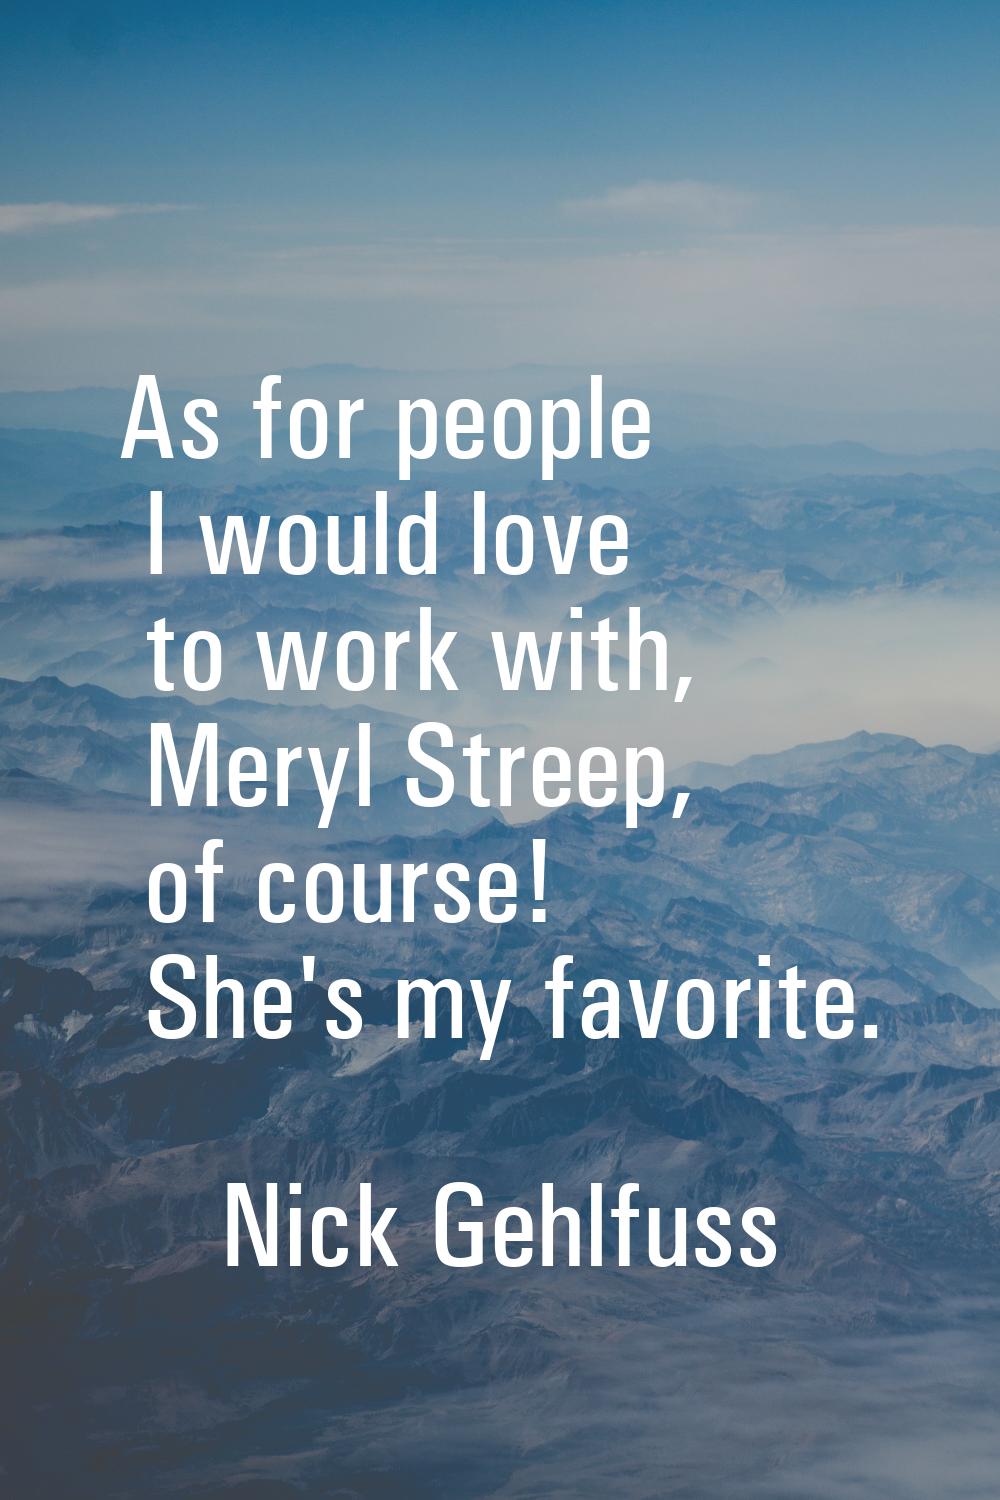 As for people I would love to work with, Meryl Streep, of course! She's my favorite.